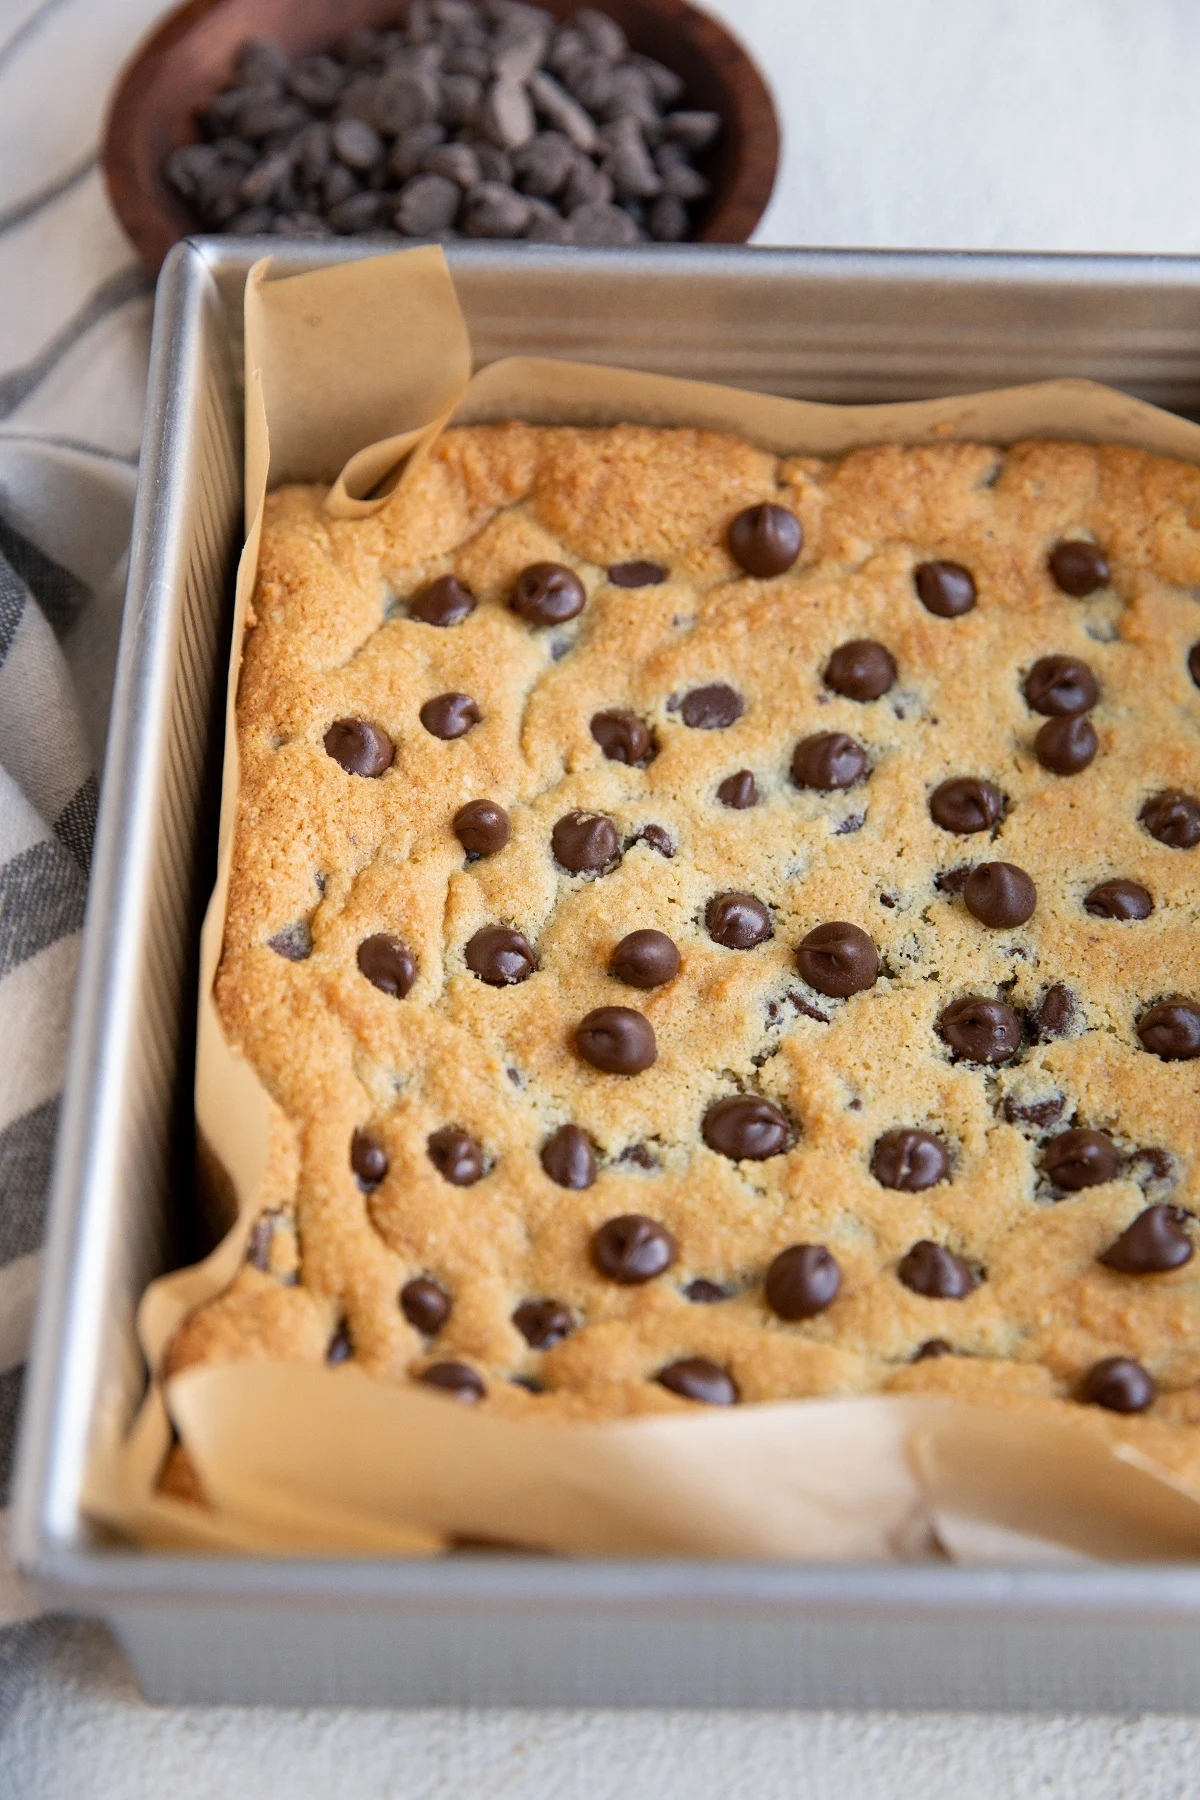 Baking pan with cookie bars inside, fresh out of the oven. A bowl of chocolate chips and a napkin to the side.